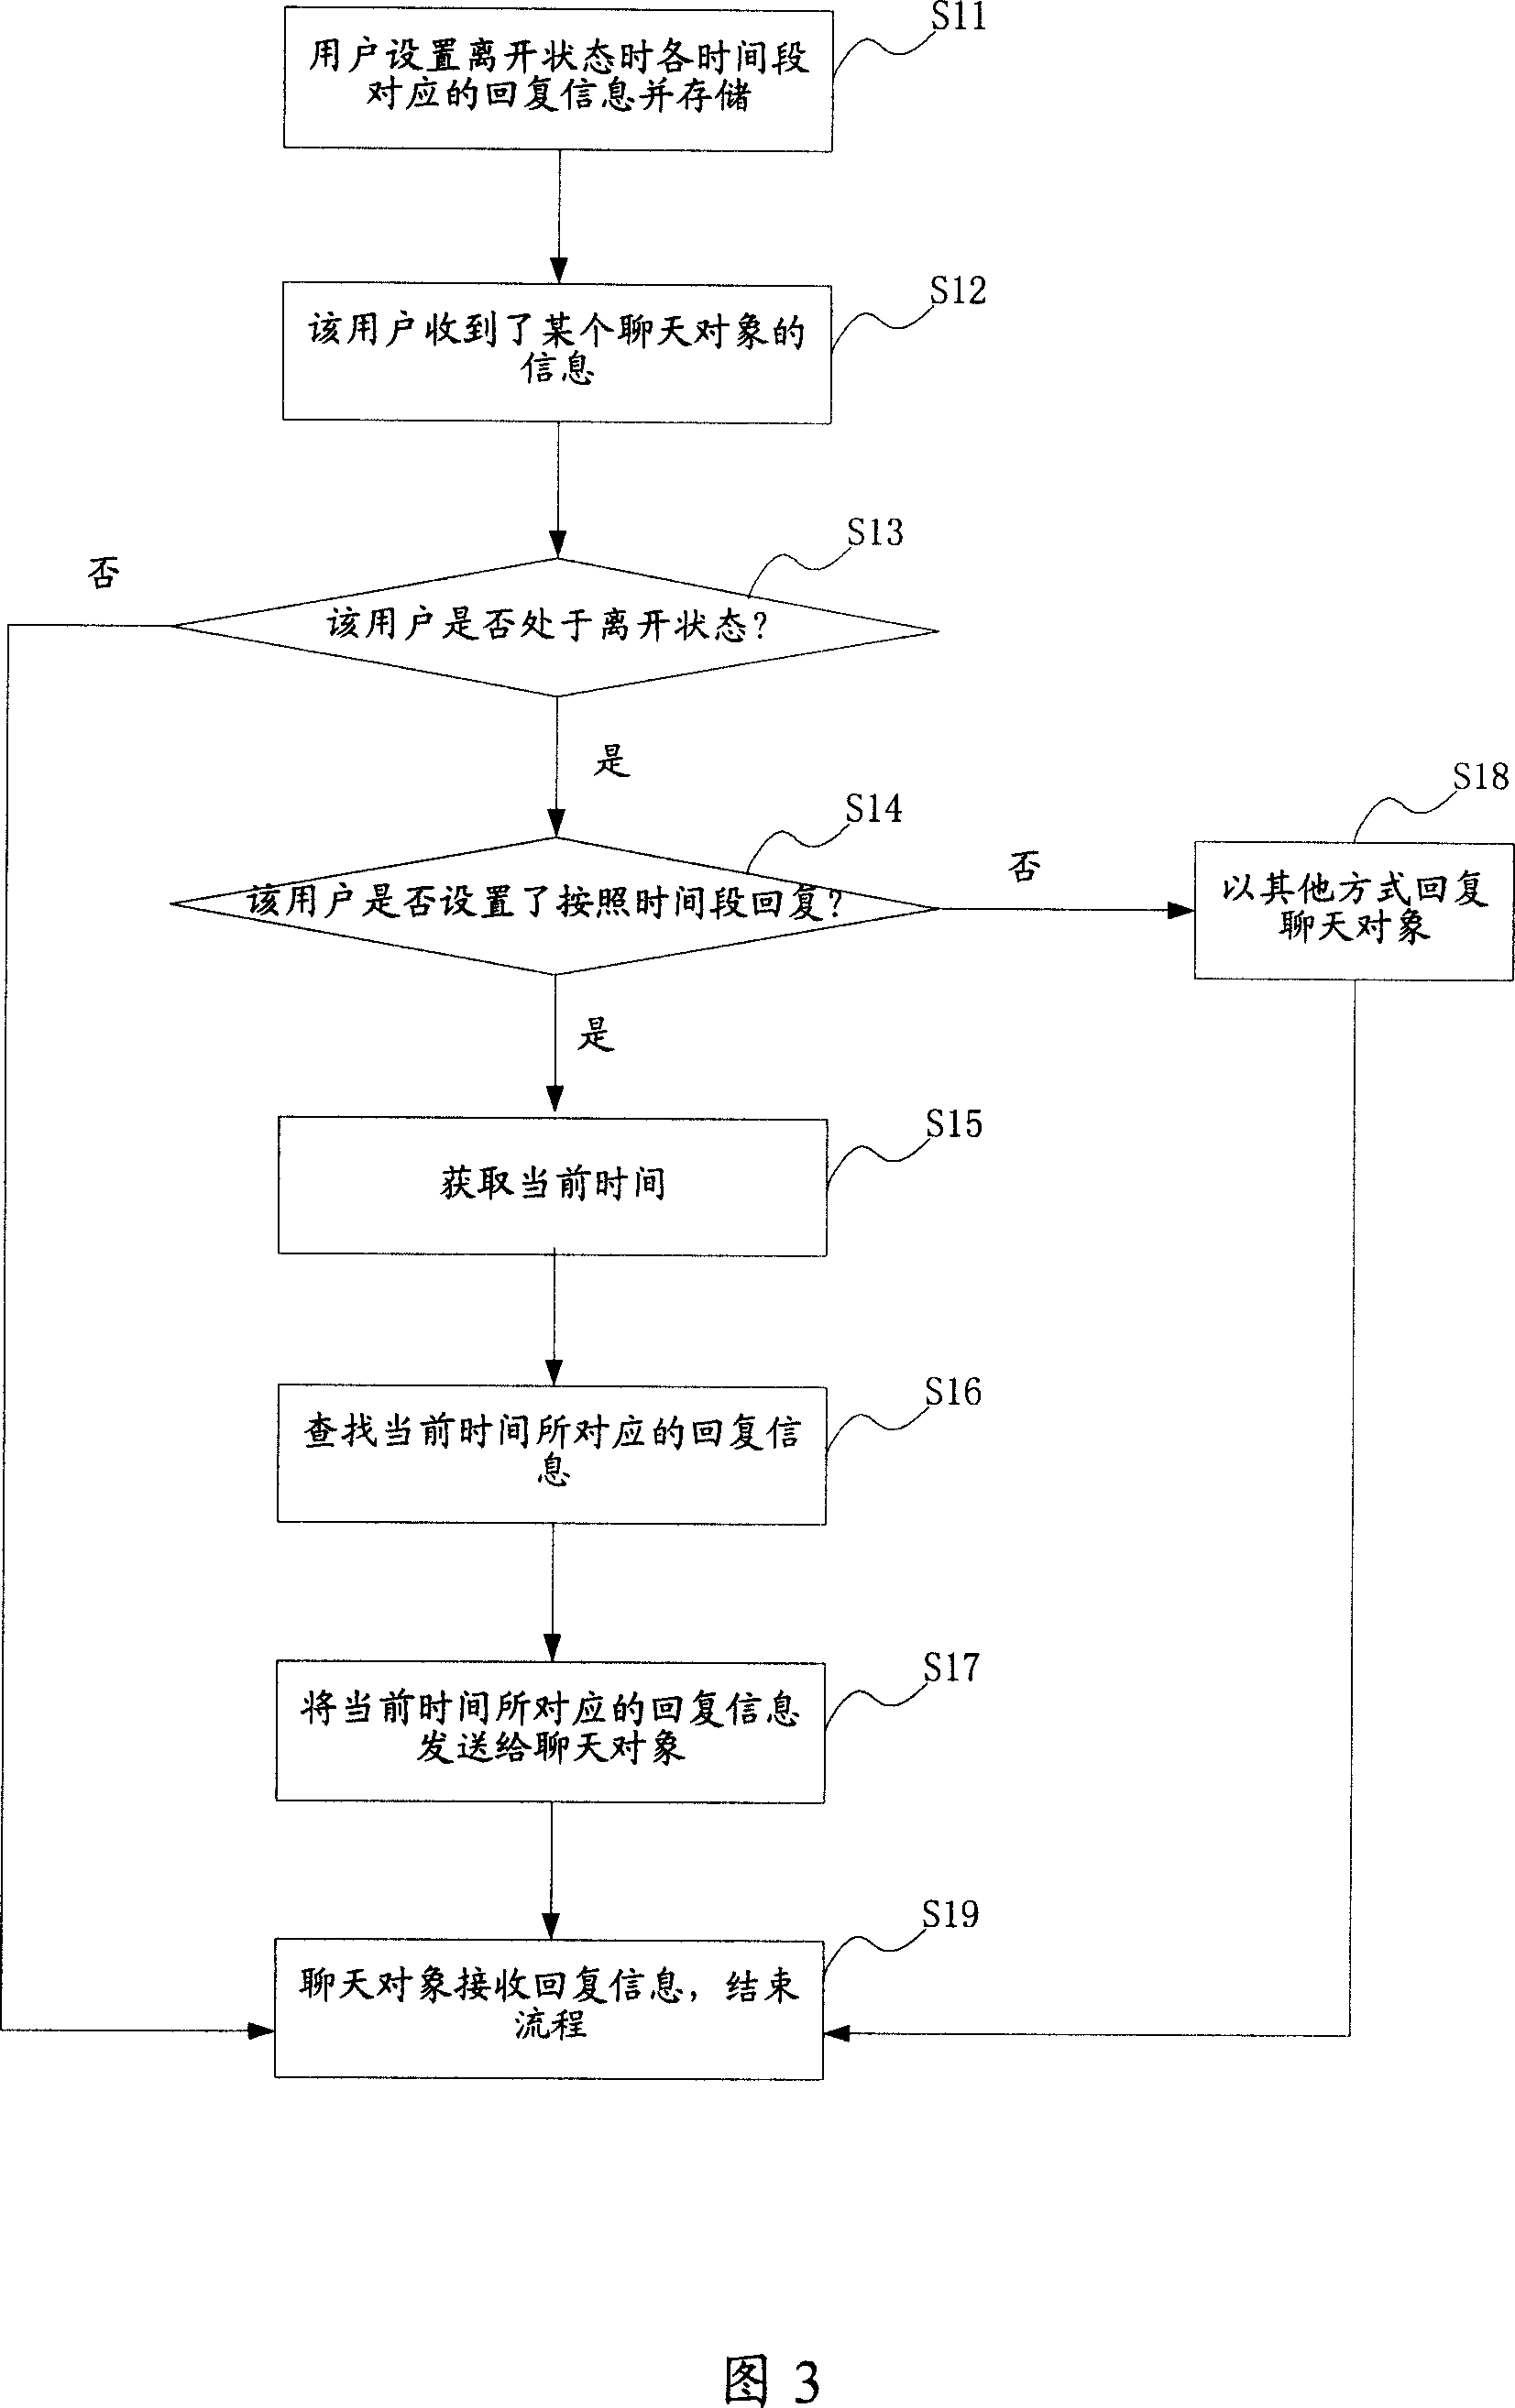 Method and system for automatic feed backing according to time slot in immediate communication